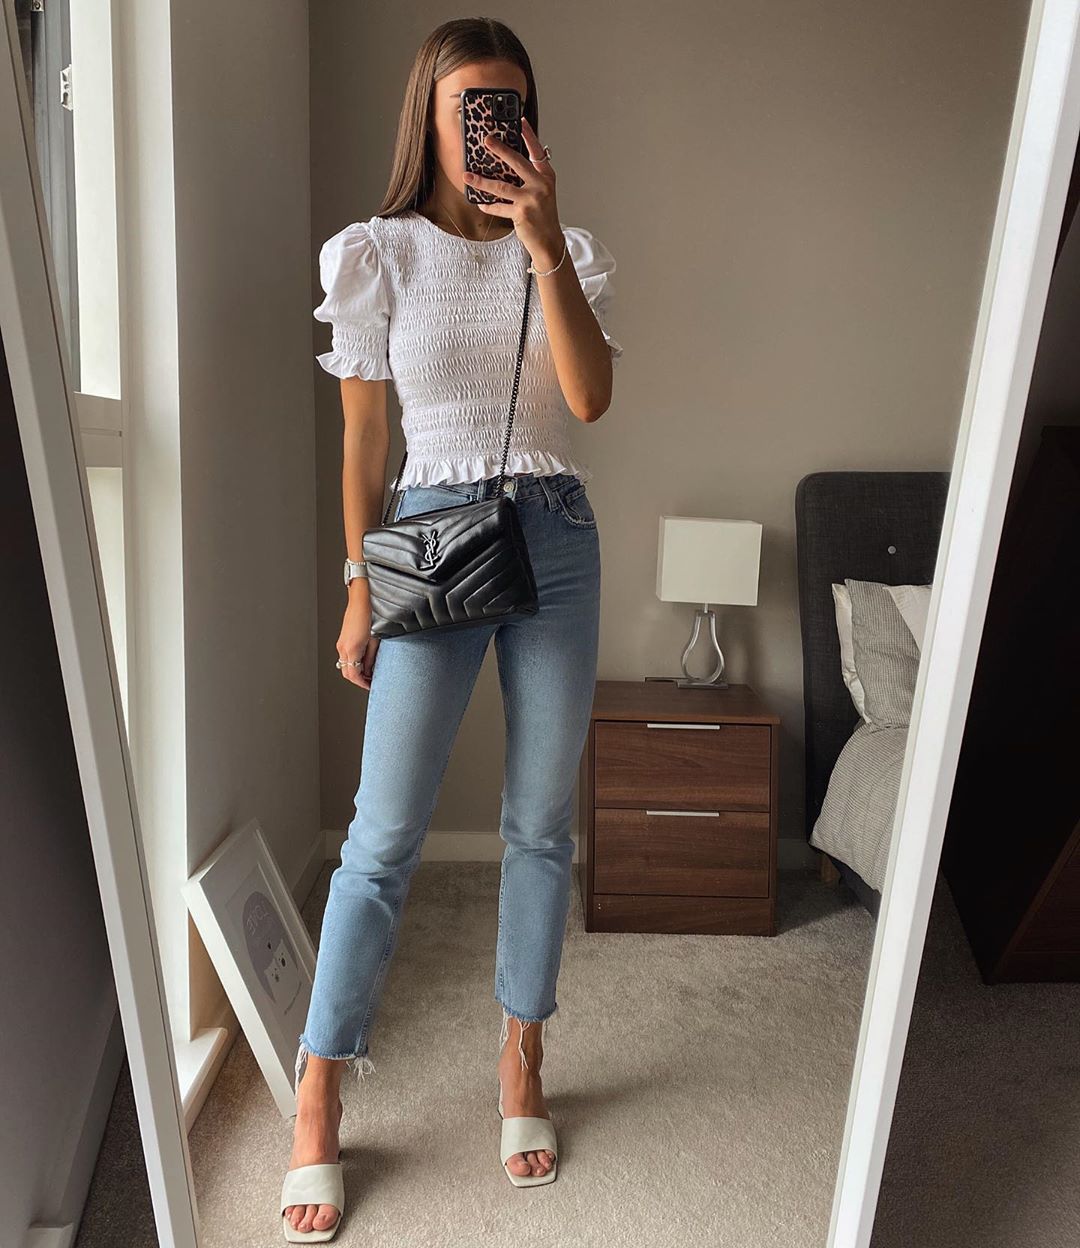 We Love This Chic Take On Jeans and a T-Shirt for Summer